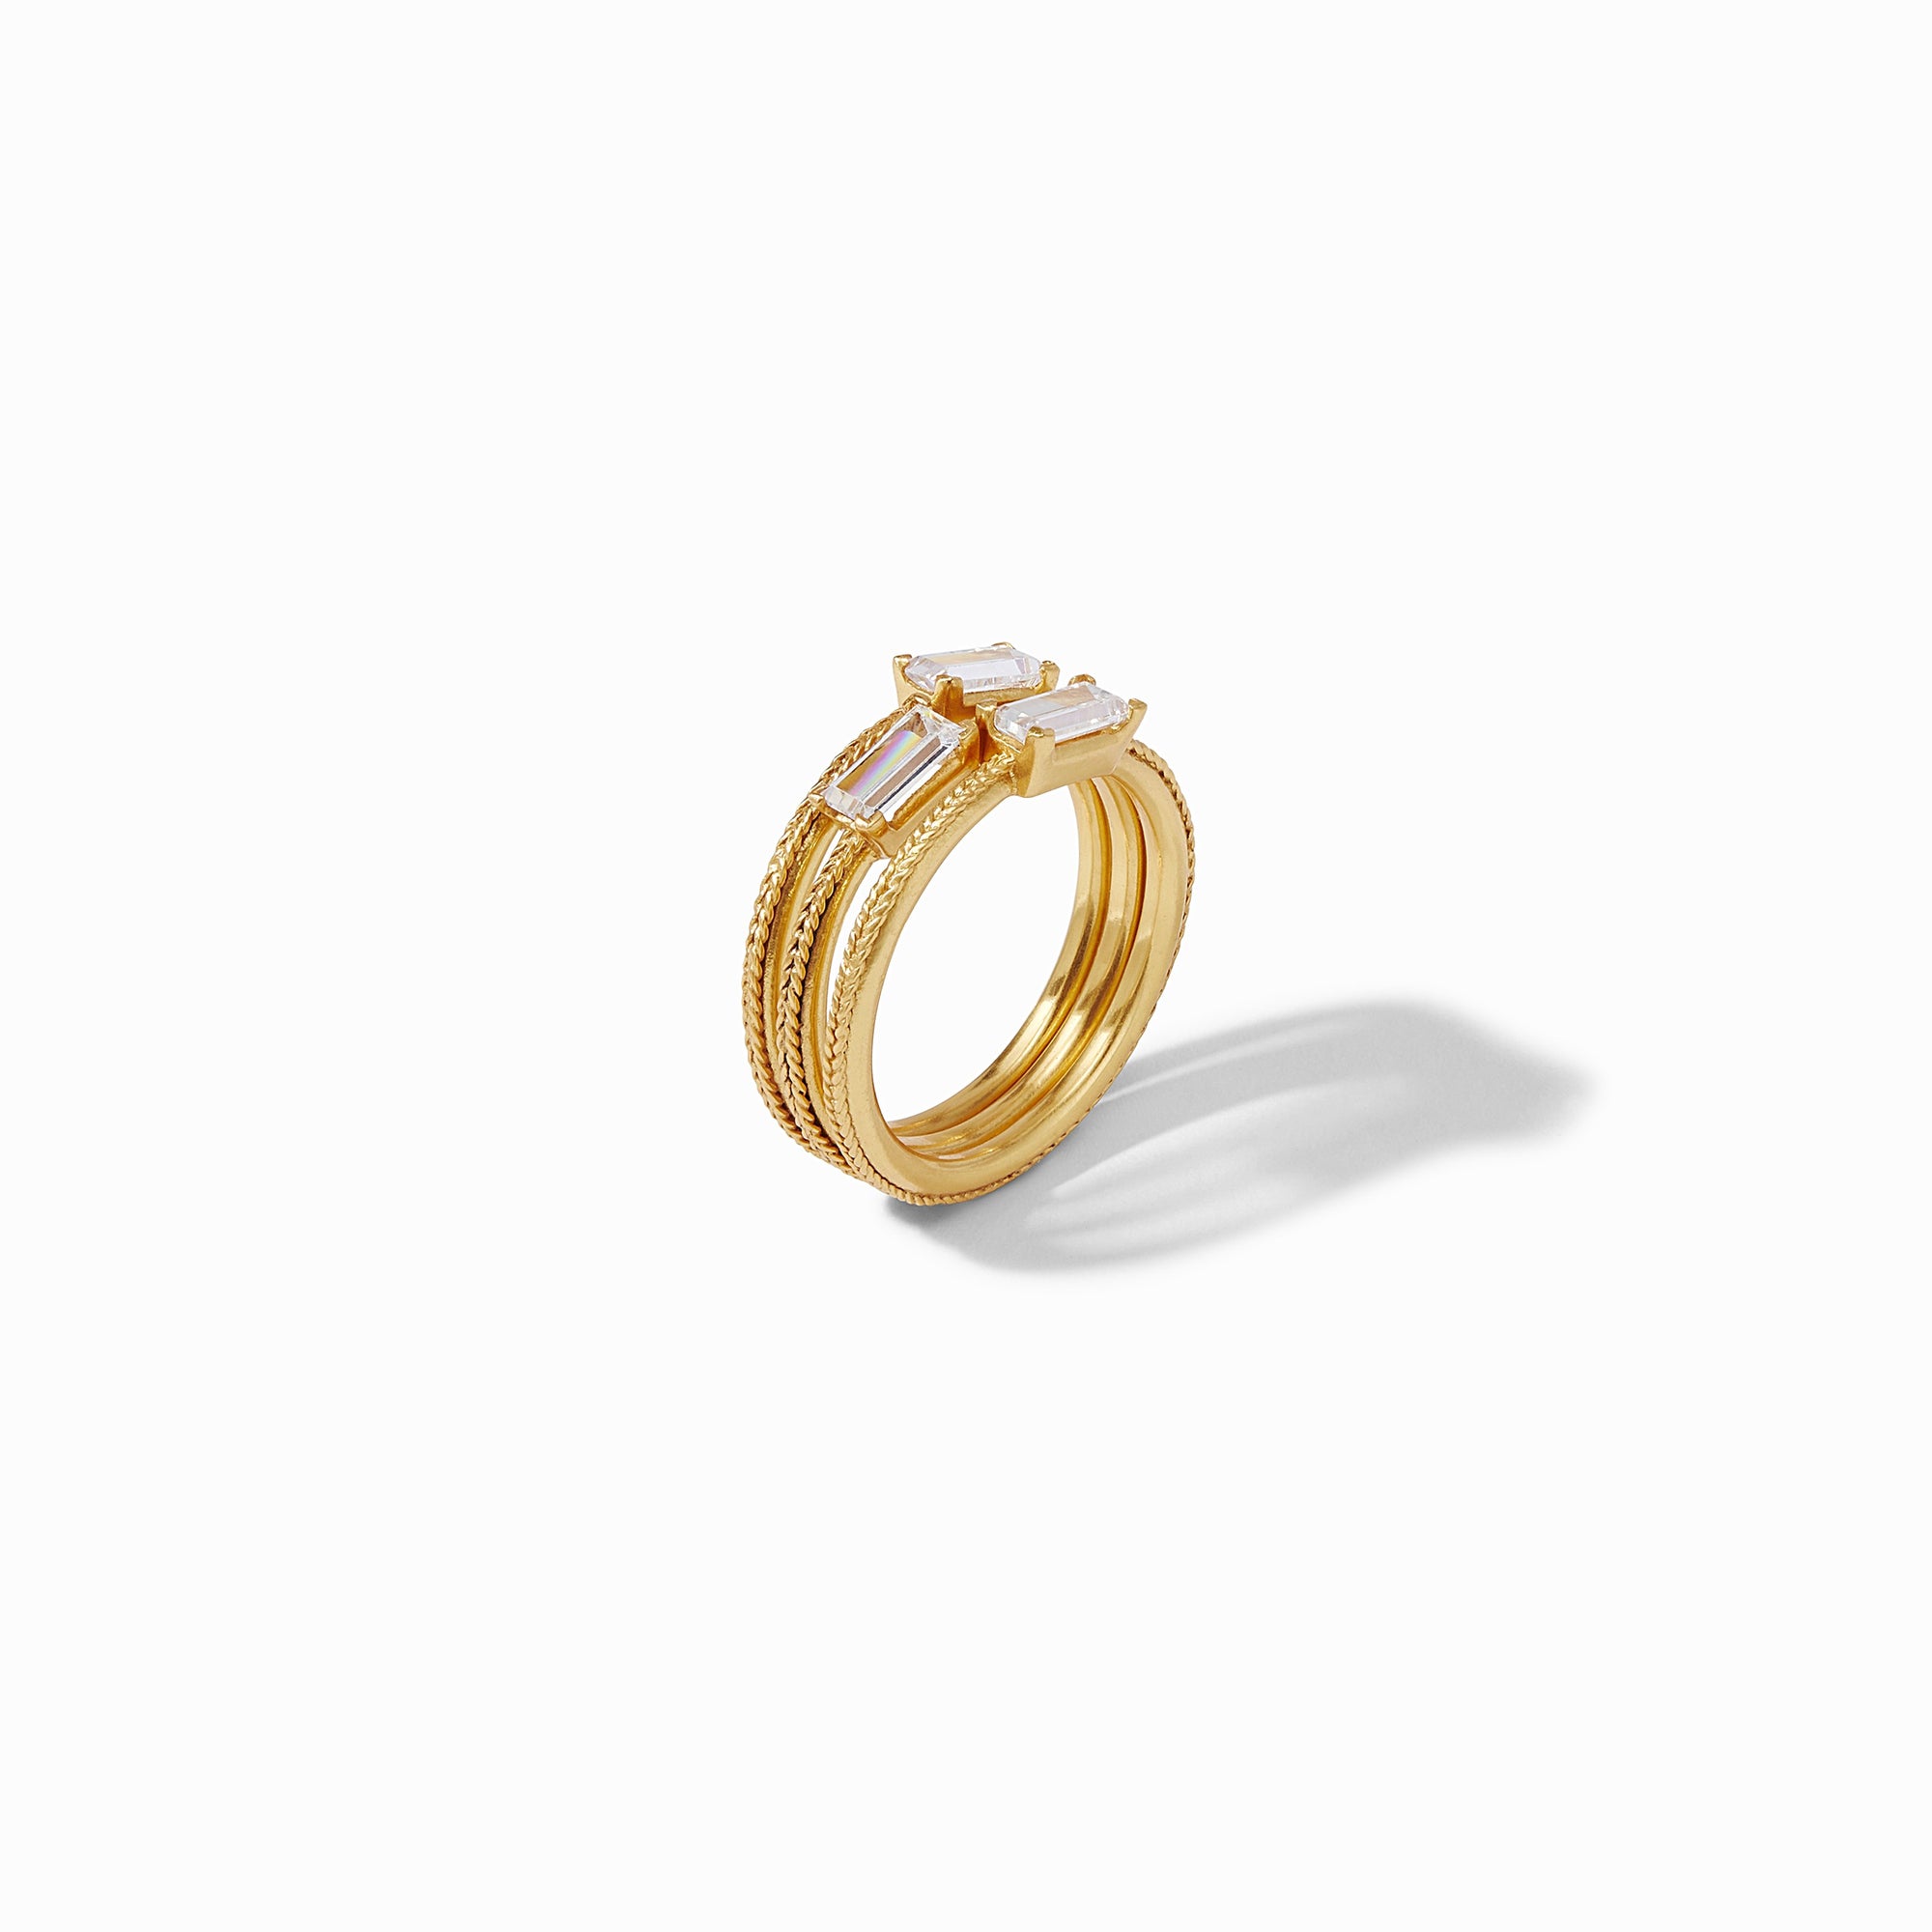 carousel, Windsor Gold Trio Ring - Standing Centered View